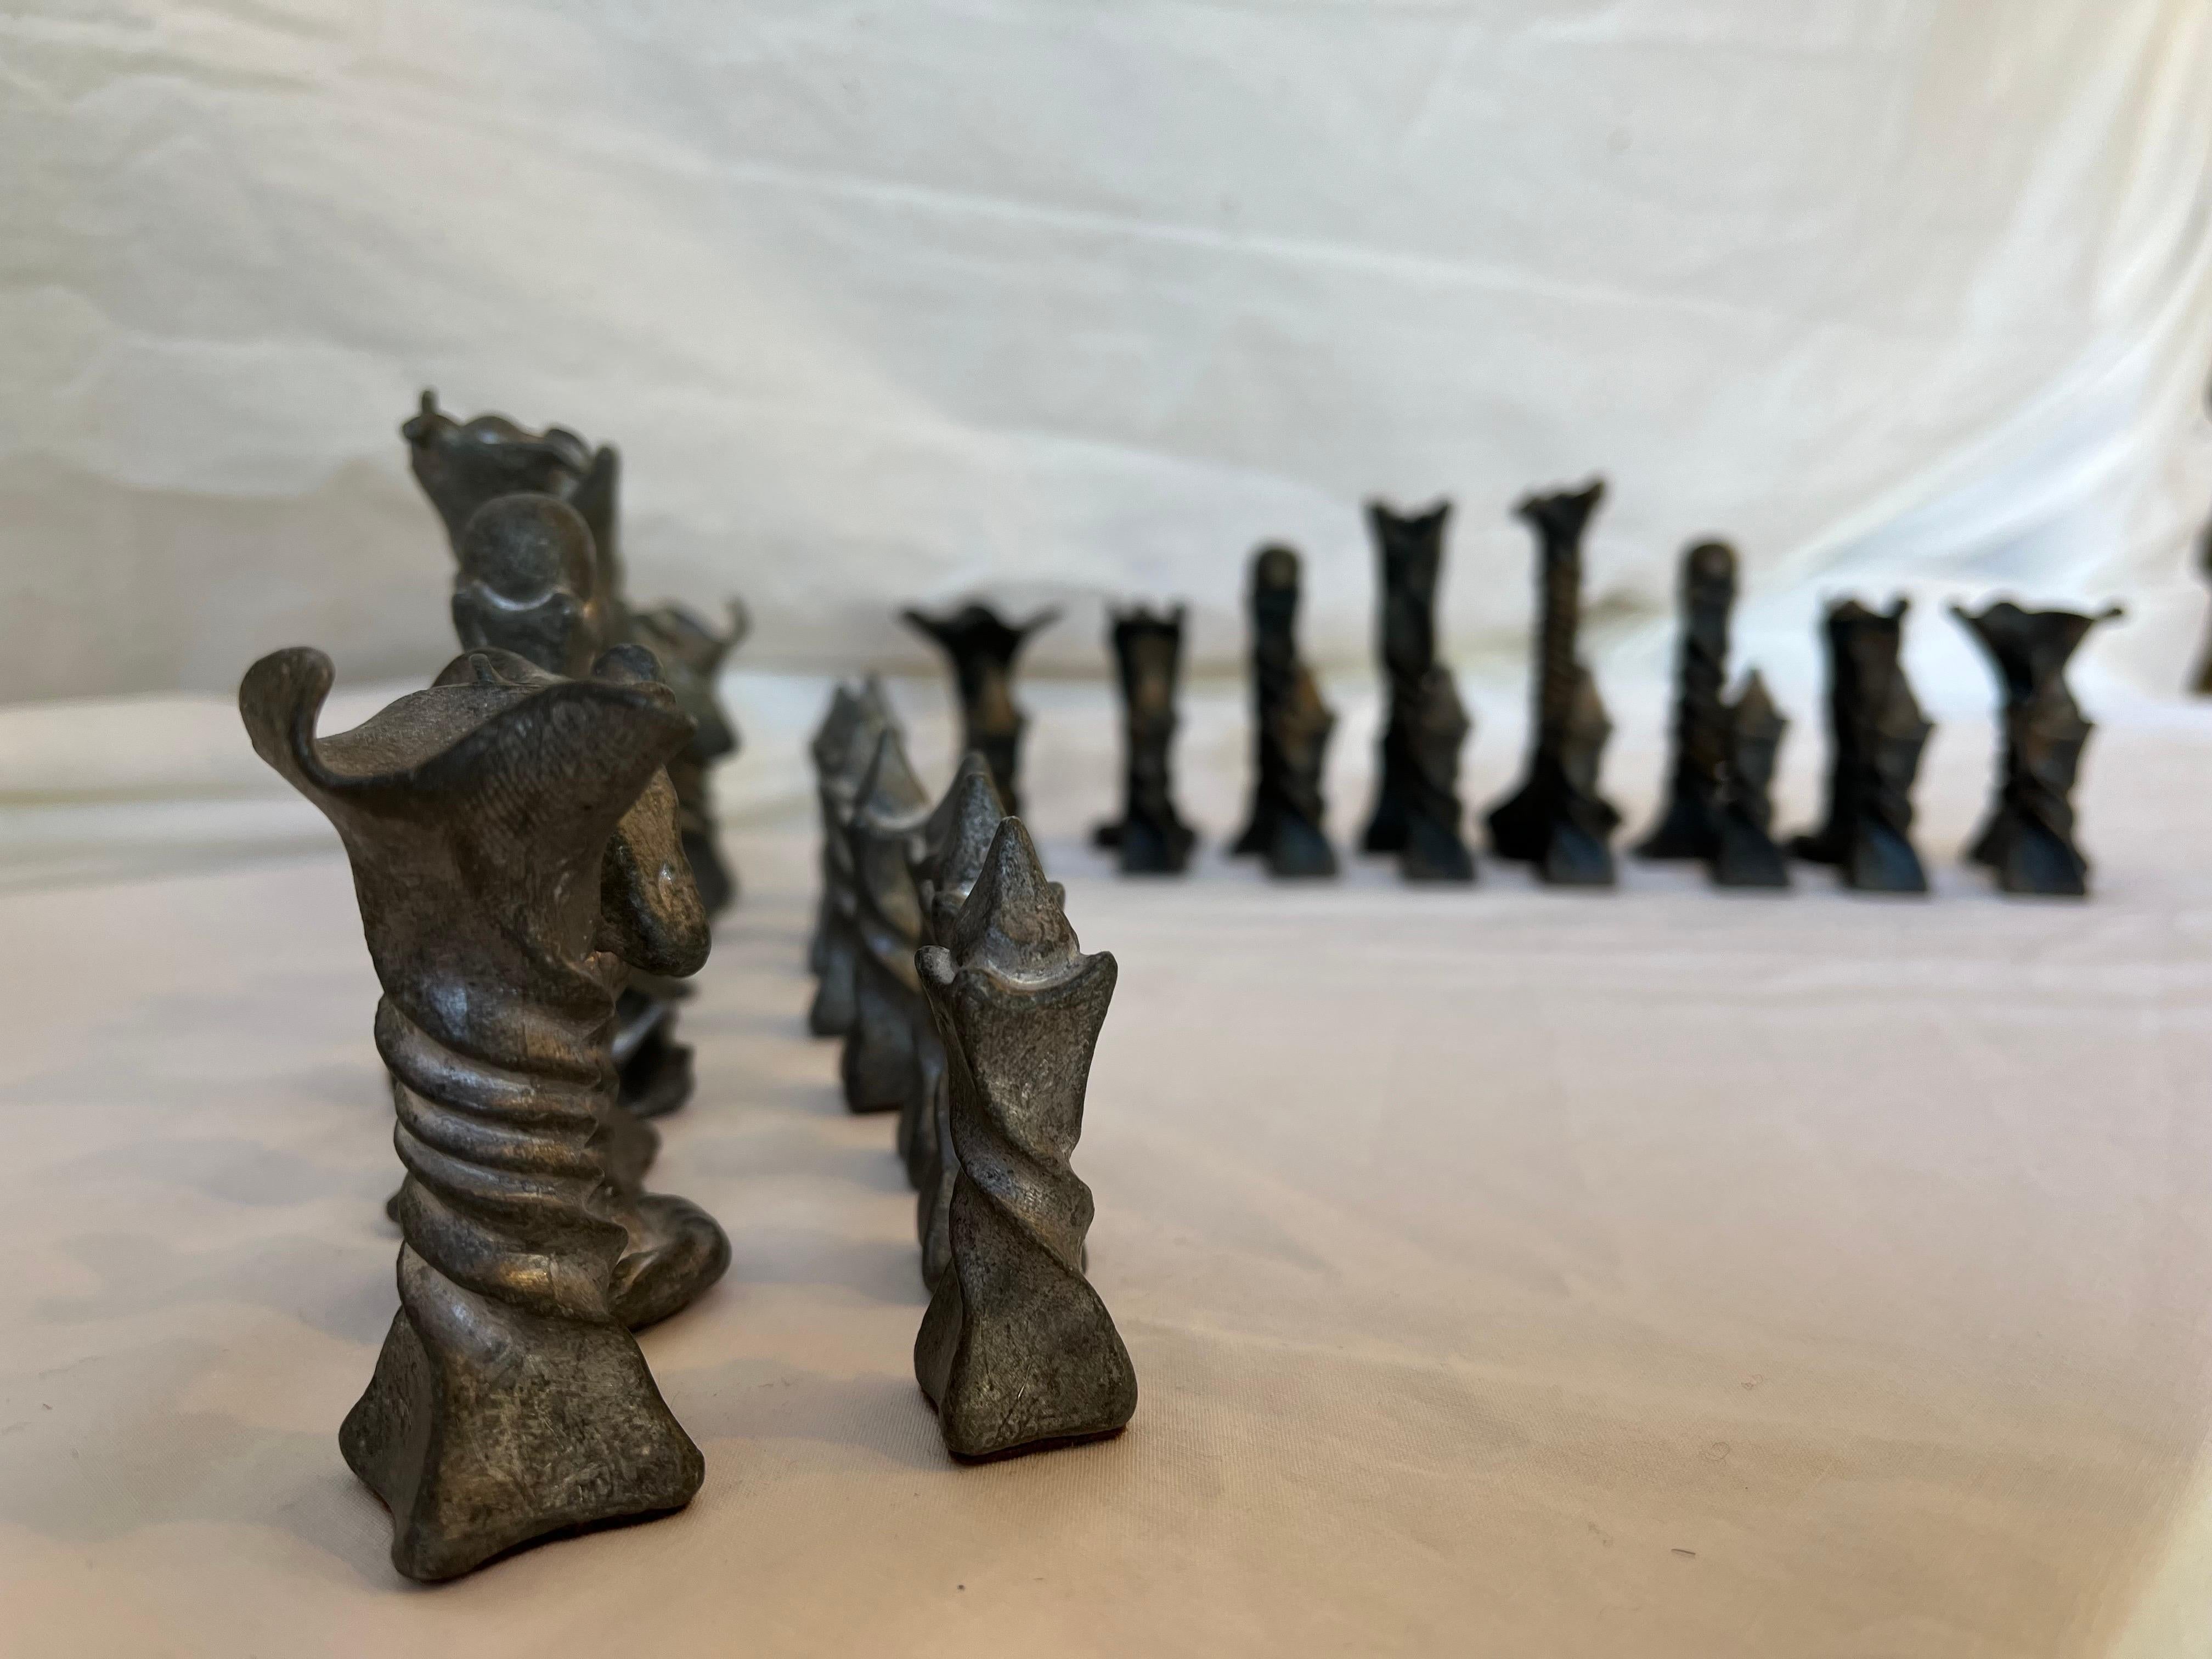 Vintage Brutalist Style Cast Metal Chess Set with Twisted and Flanged Design 14